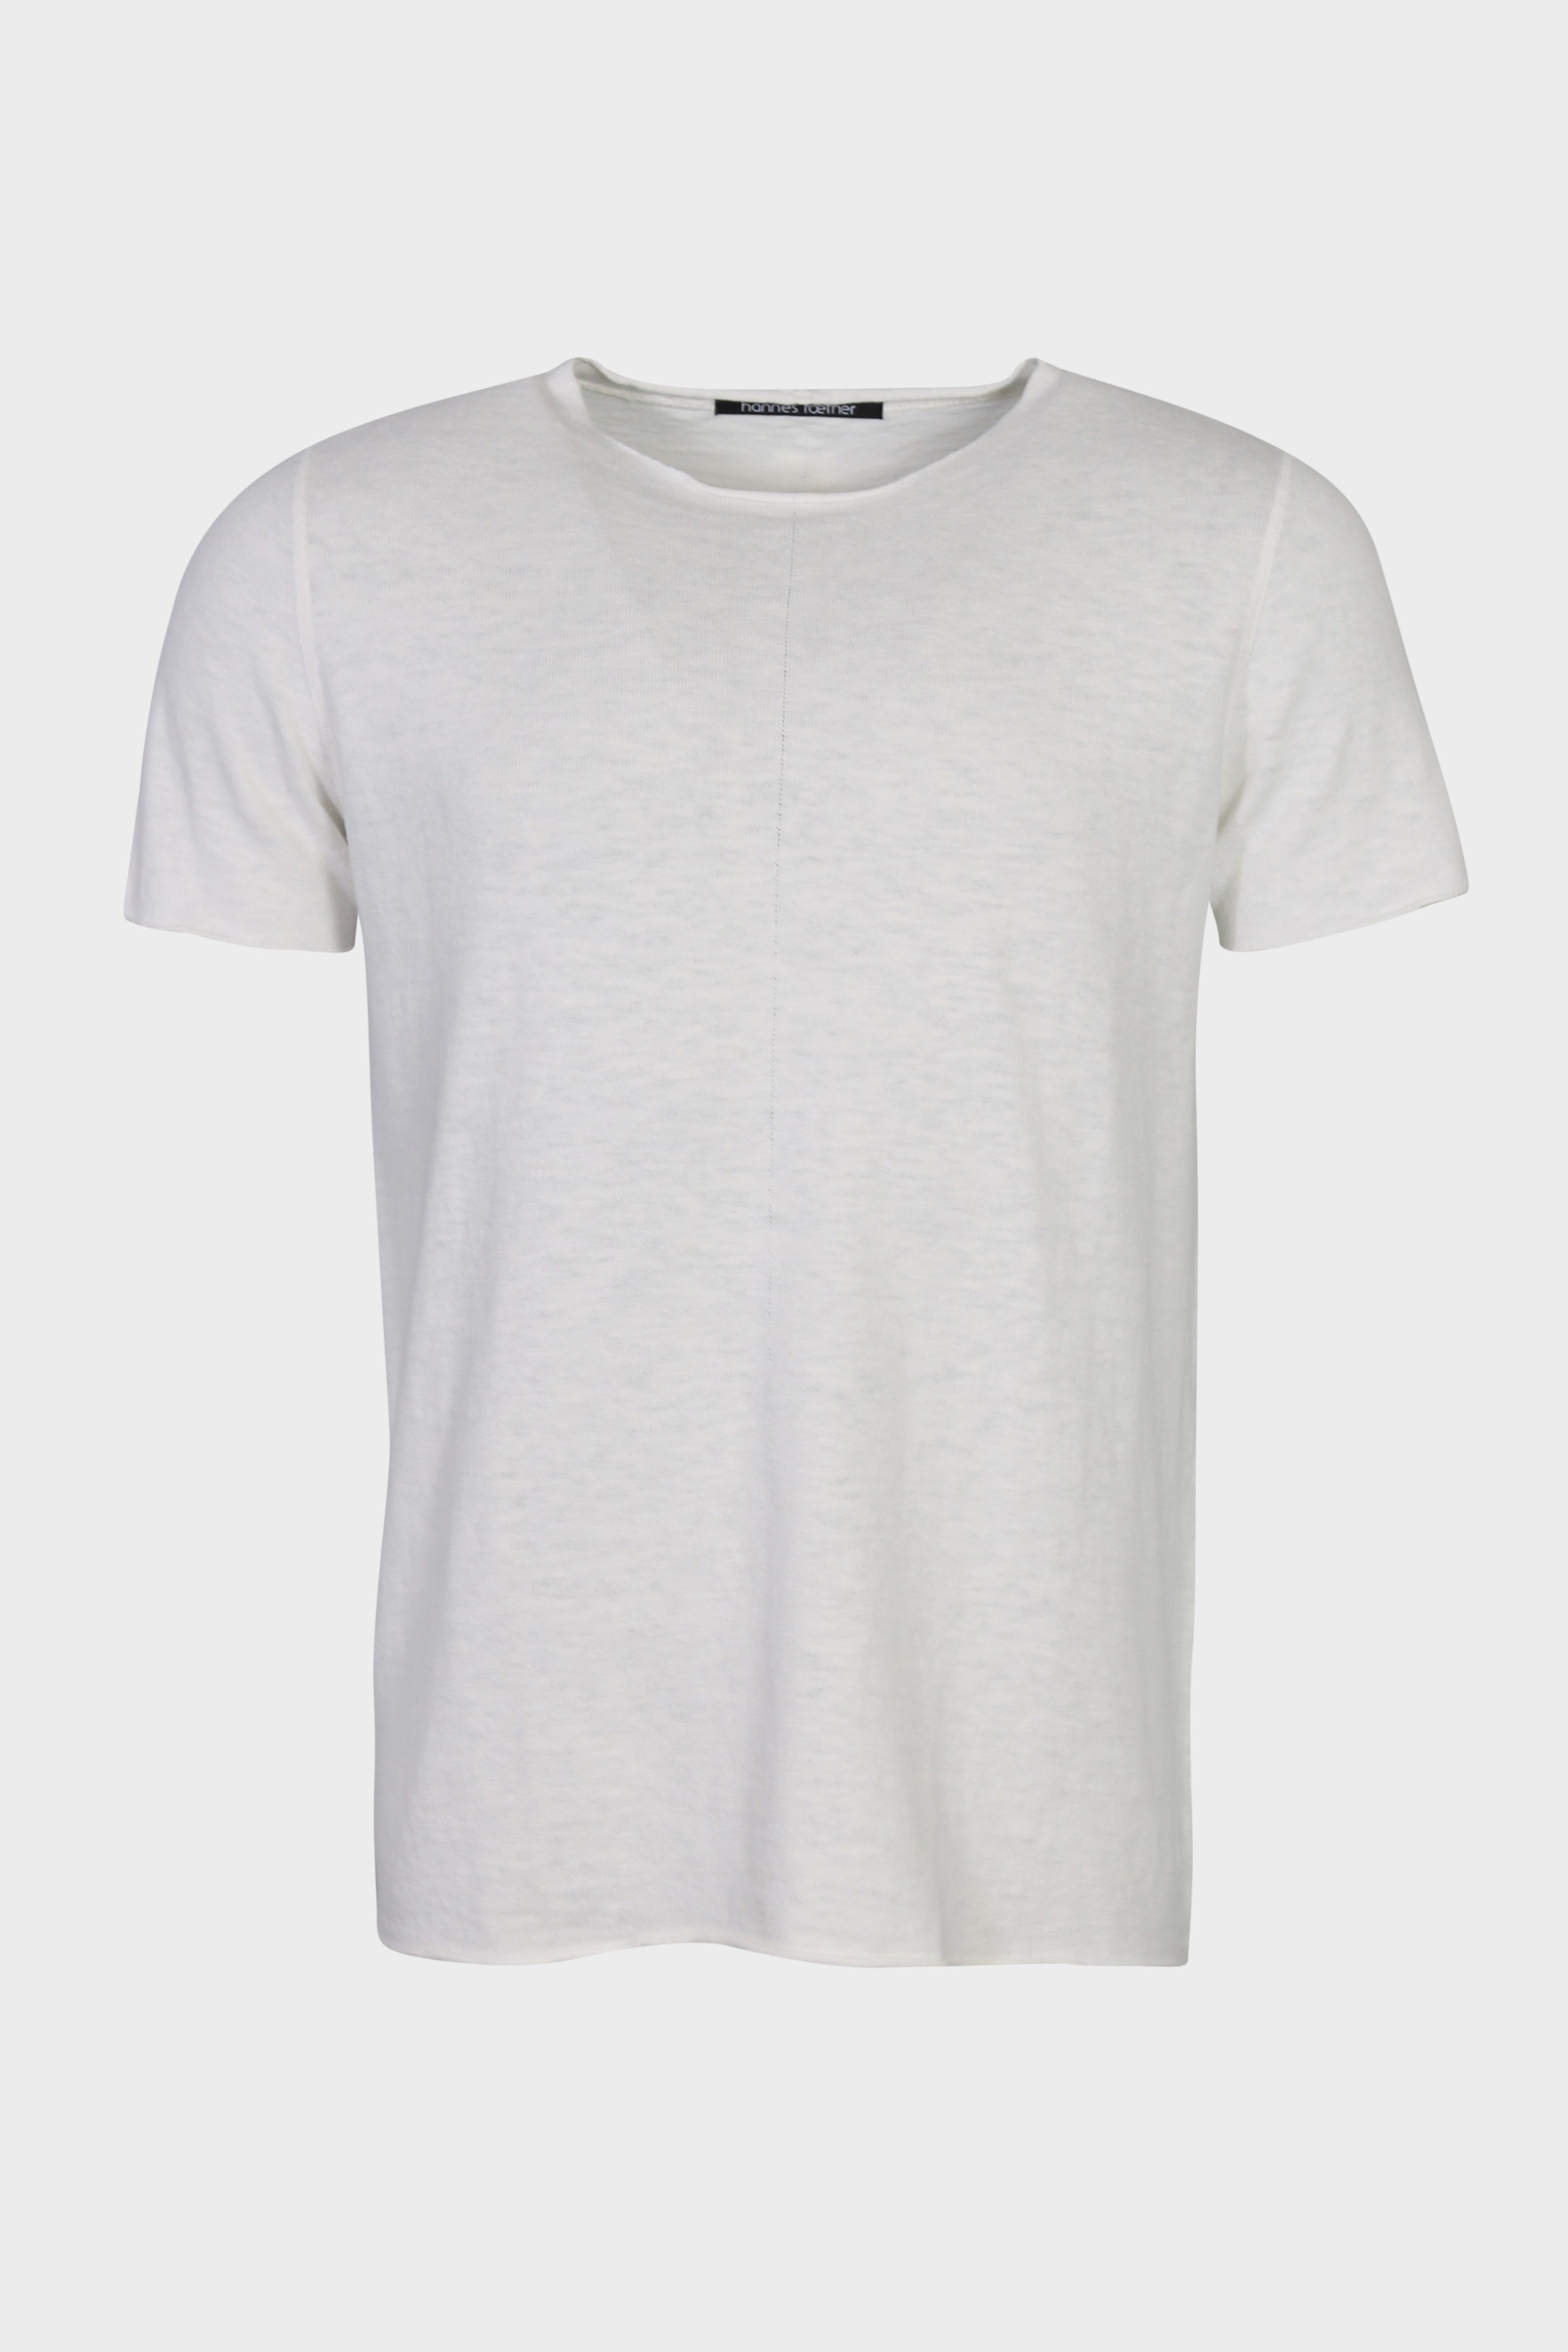 HANNES ROETHER Knit T-Shirt in Offwhite 2XL